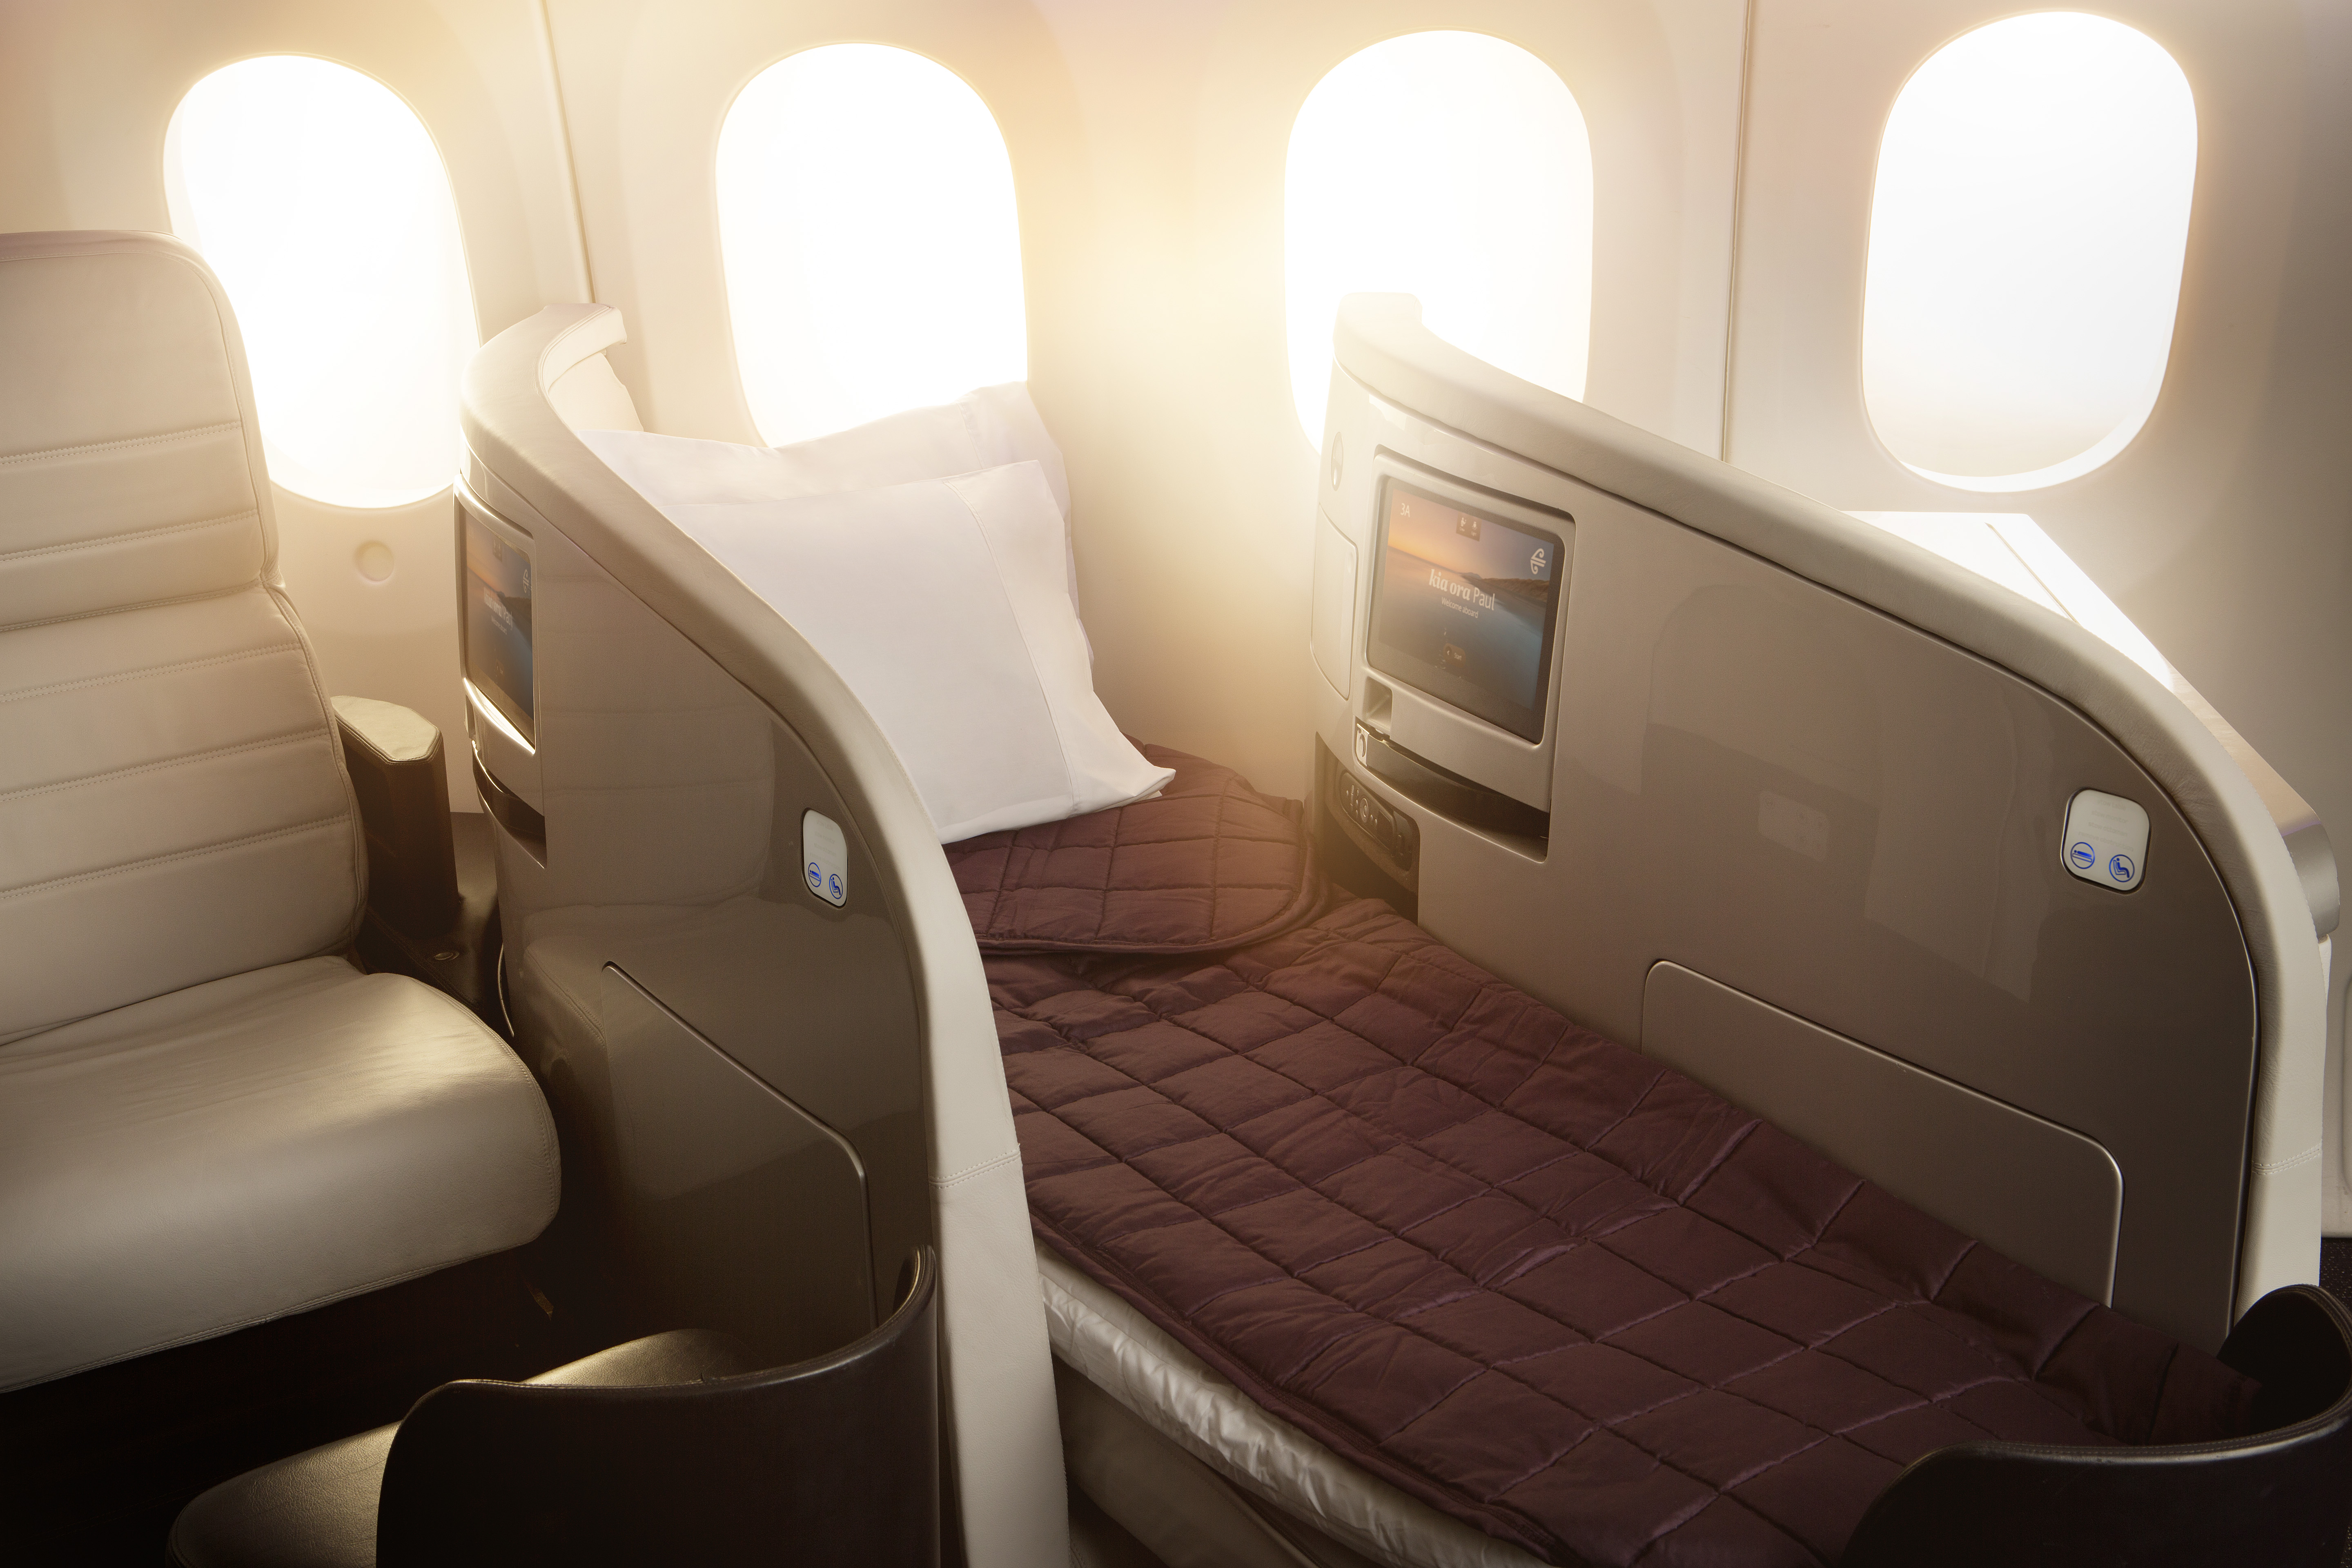 Air New Zealand Reveals Their Boeing 787-9 Dreamliner Cabin and First